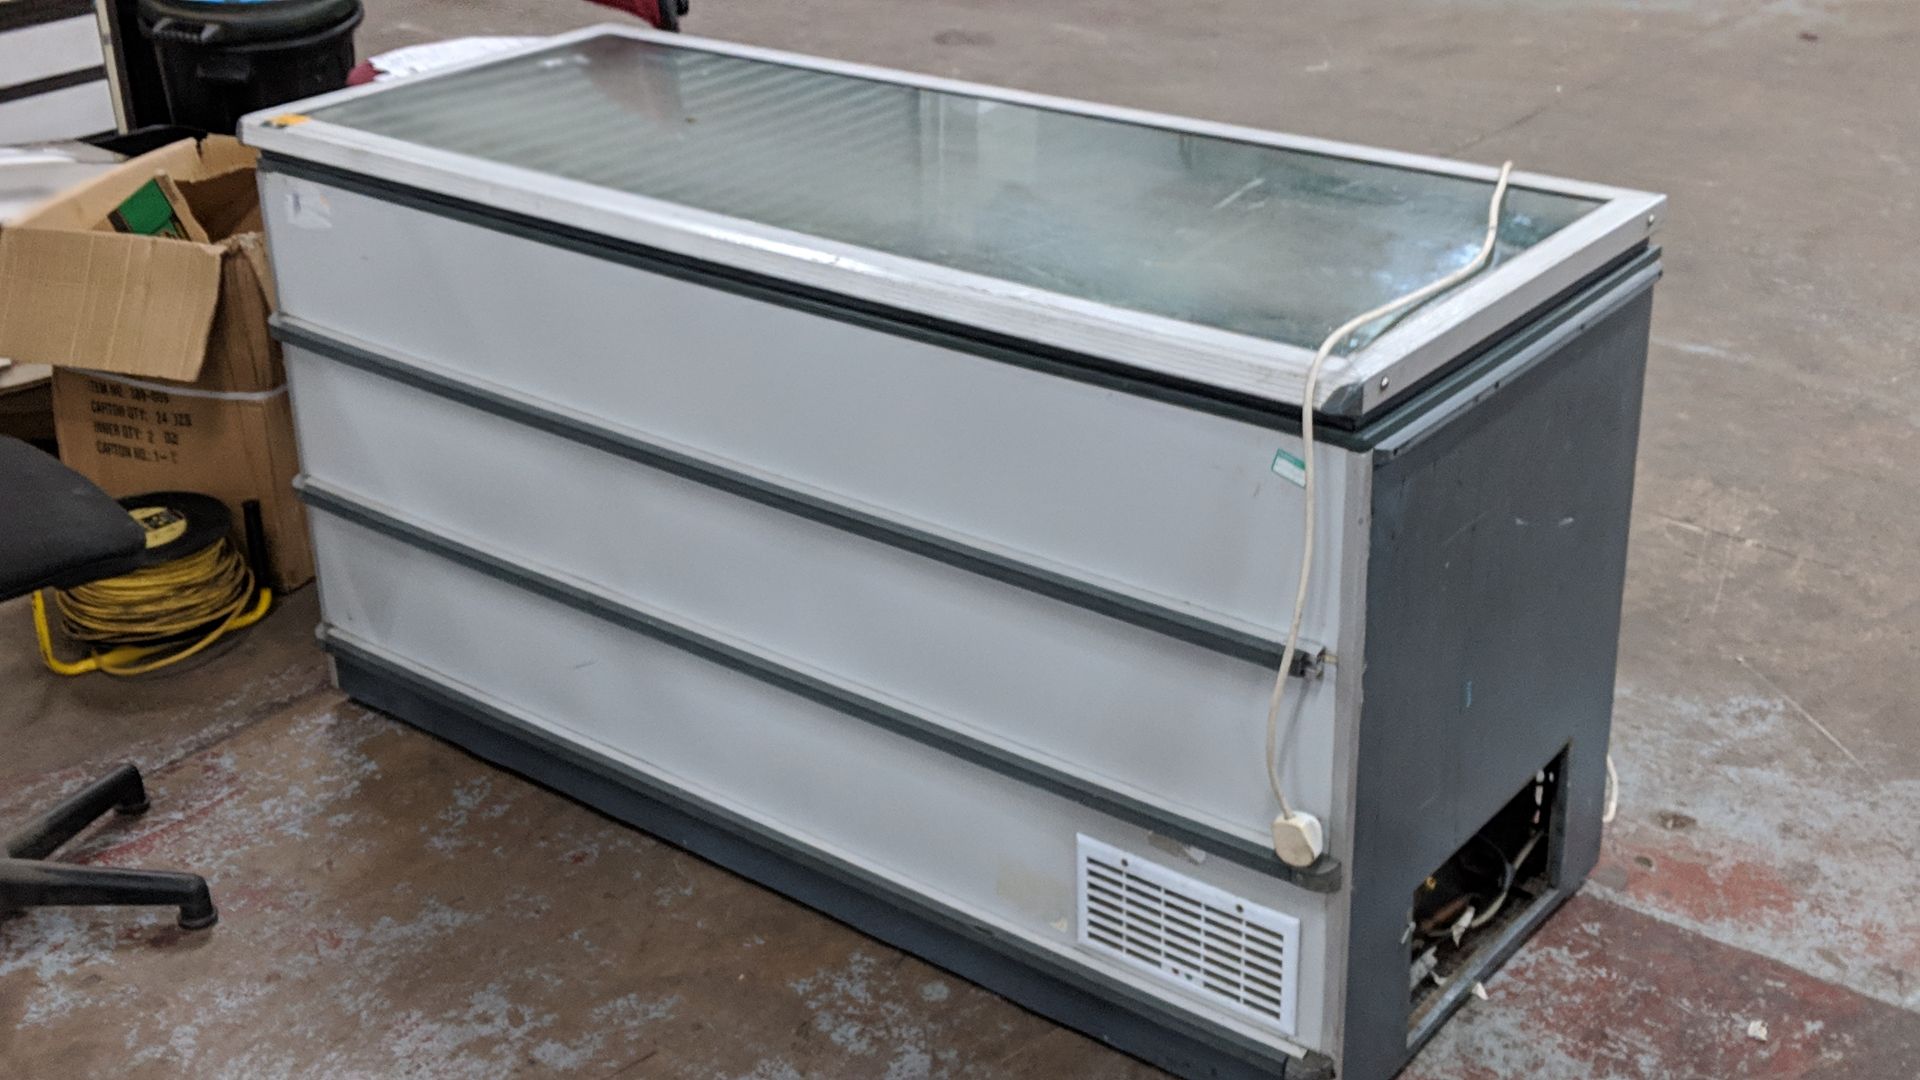 Clear topped retail display chest freezer, circa 1700mm wide IMPORTANT: Please remember goods